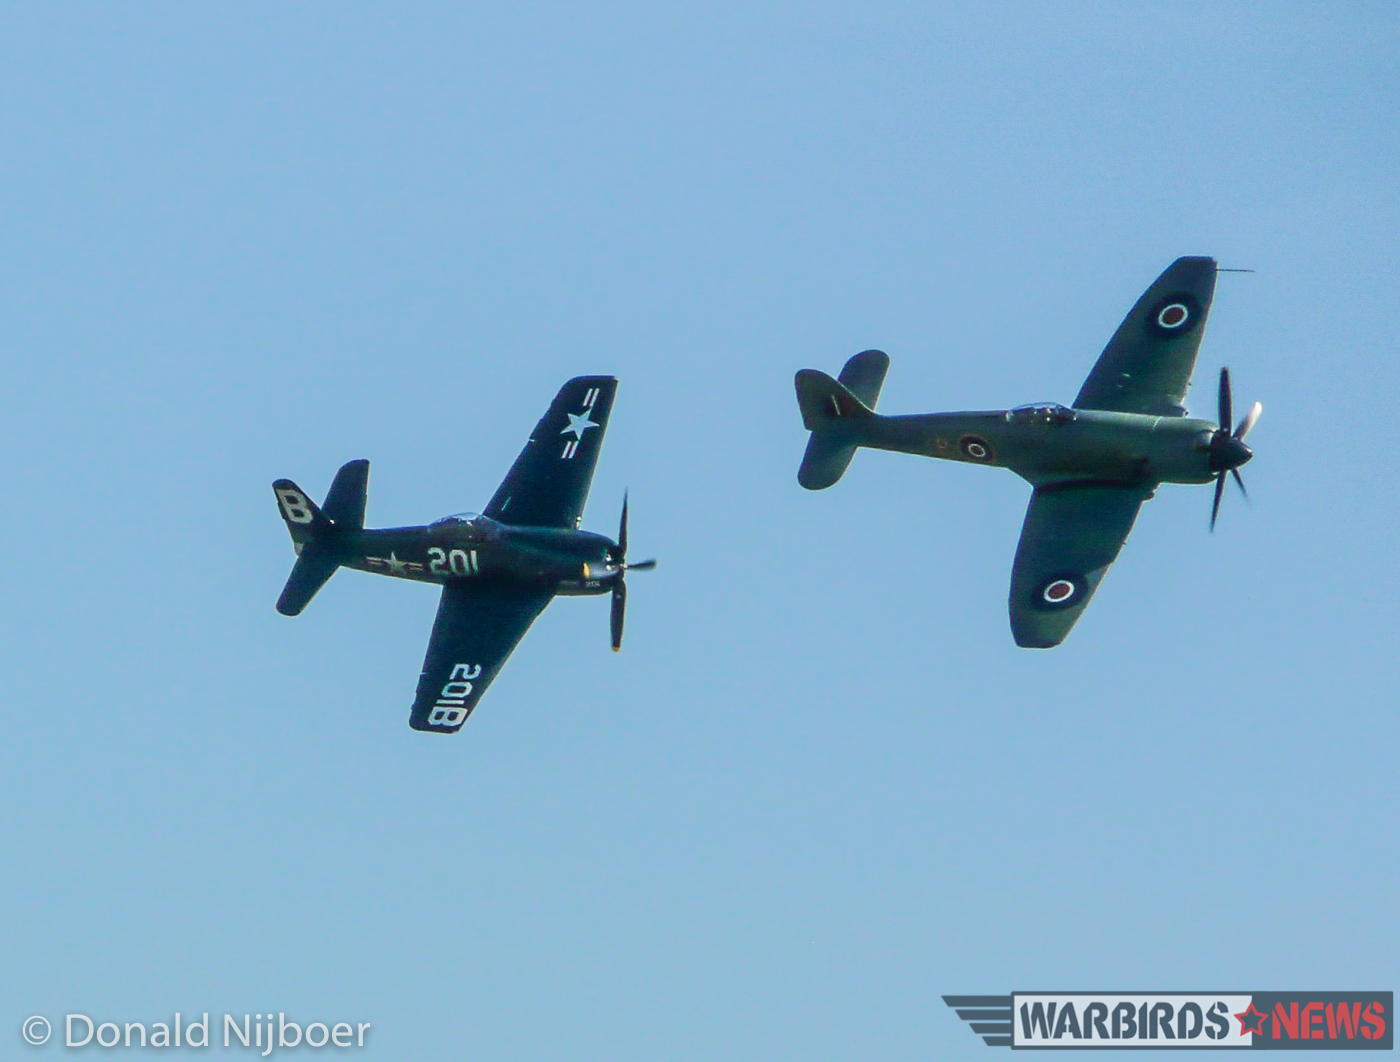 The Bearcat and Fury opened the show. (photo by Donald Nijboer)